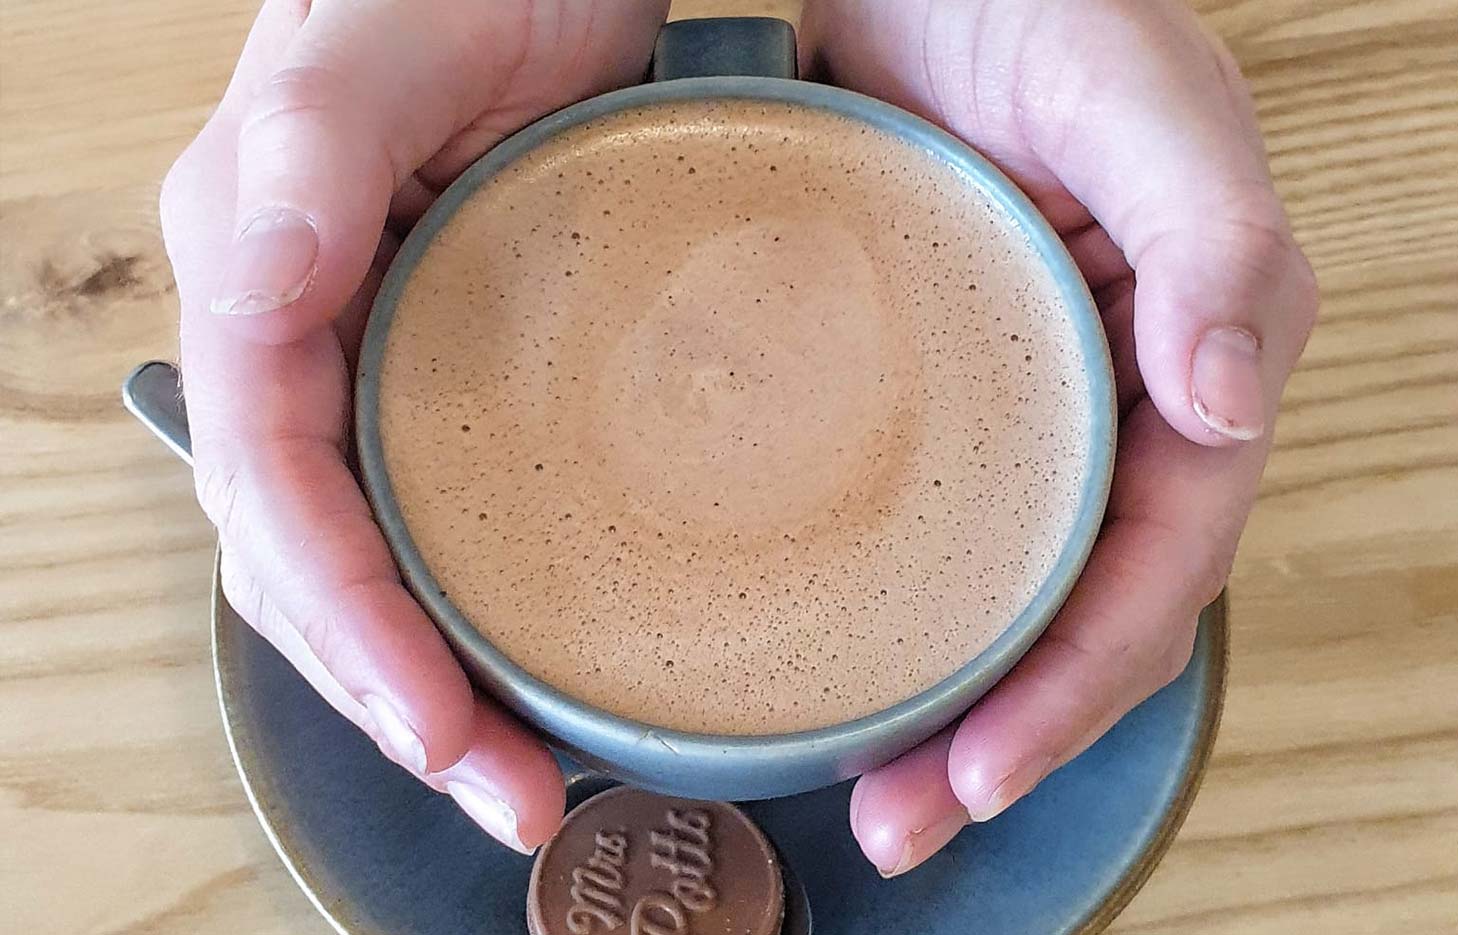 A person holding a hot chocolate